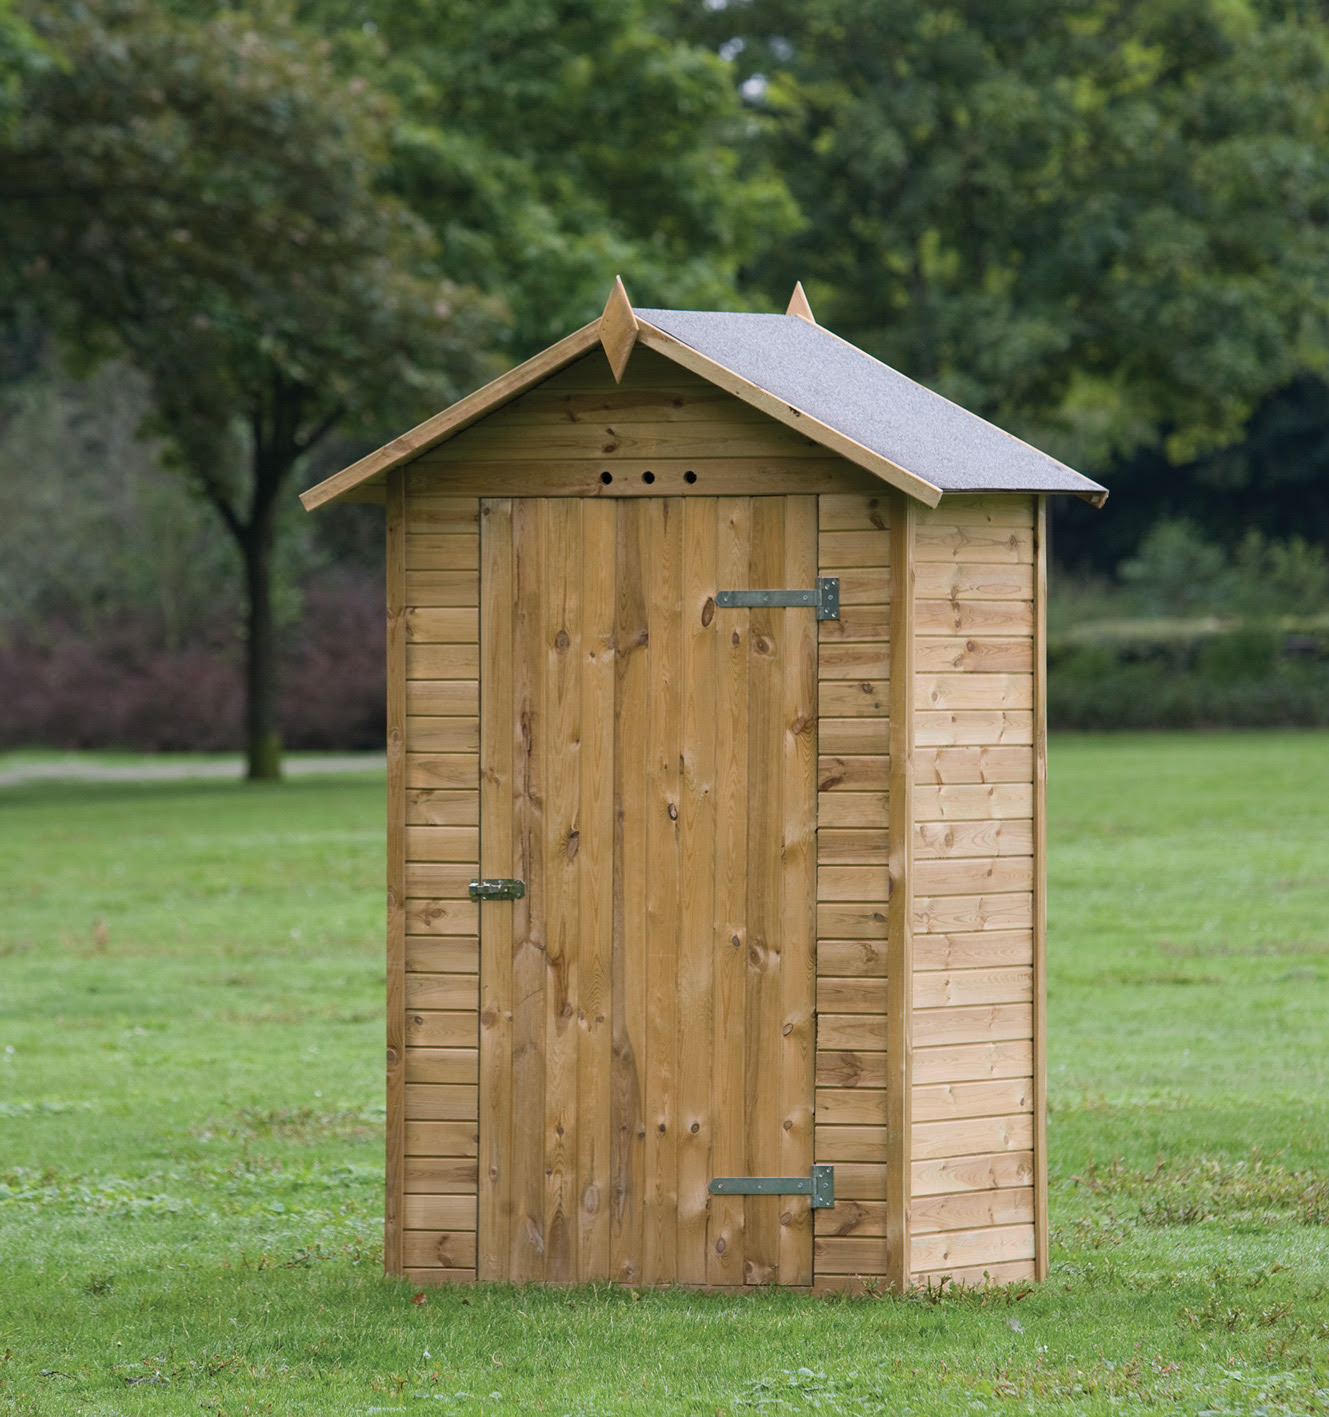 Shedpa: Best price on outdoor storage sheds